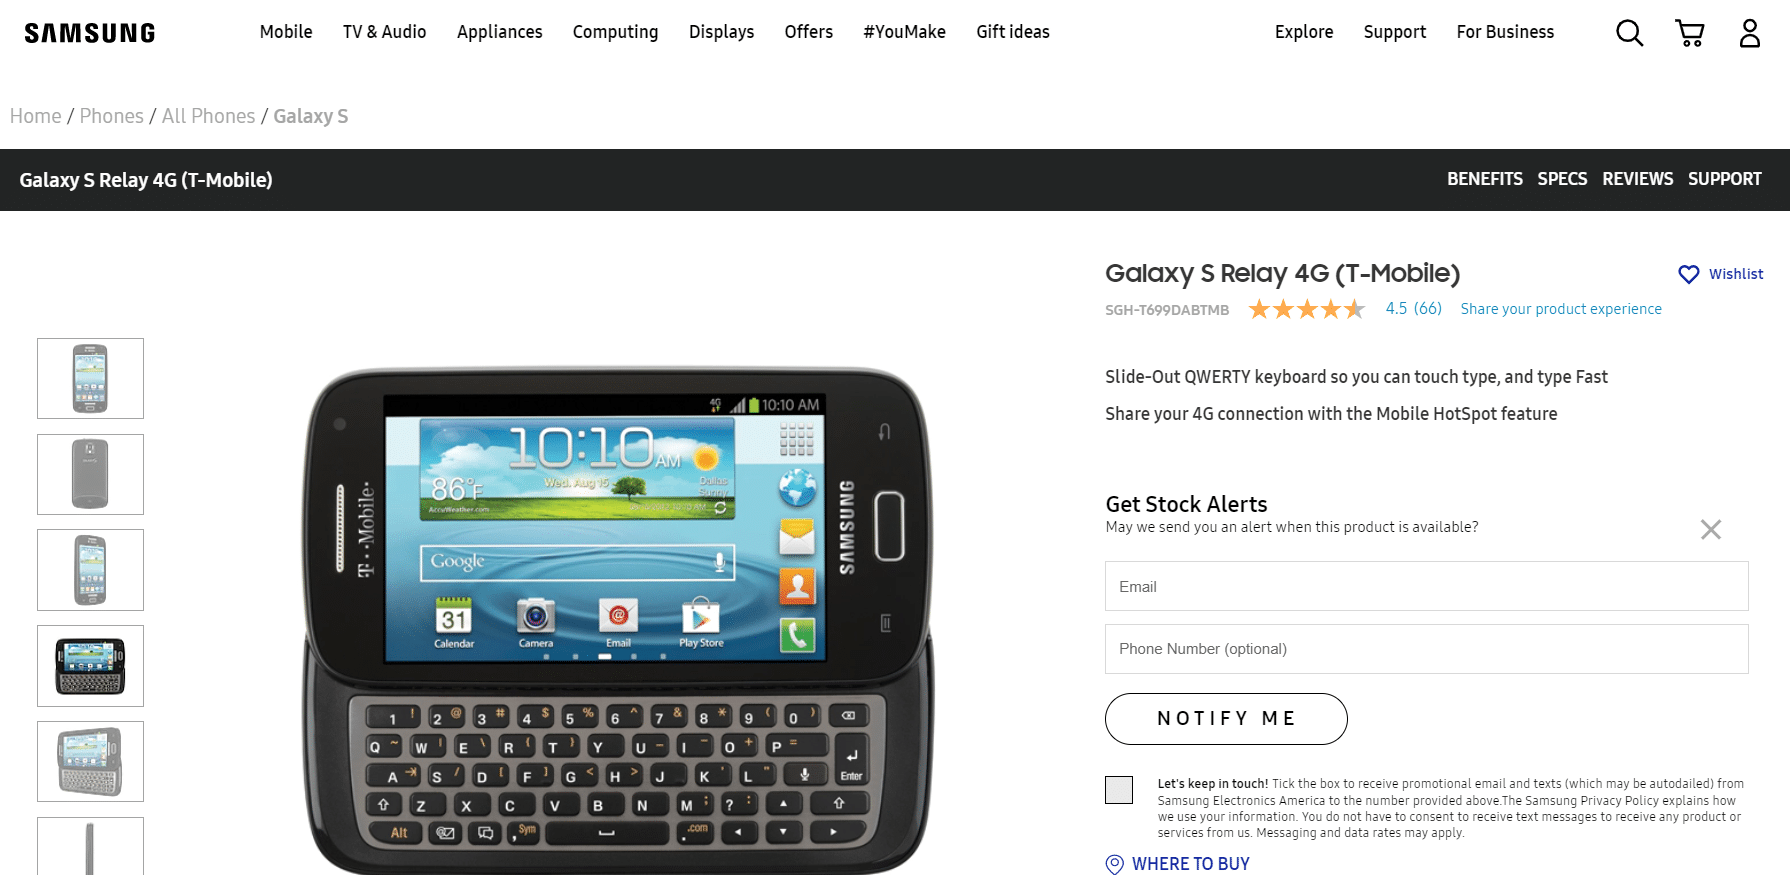 Samsung Galaxy S Relay 4G. Best Android Smartphones with Keyboards